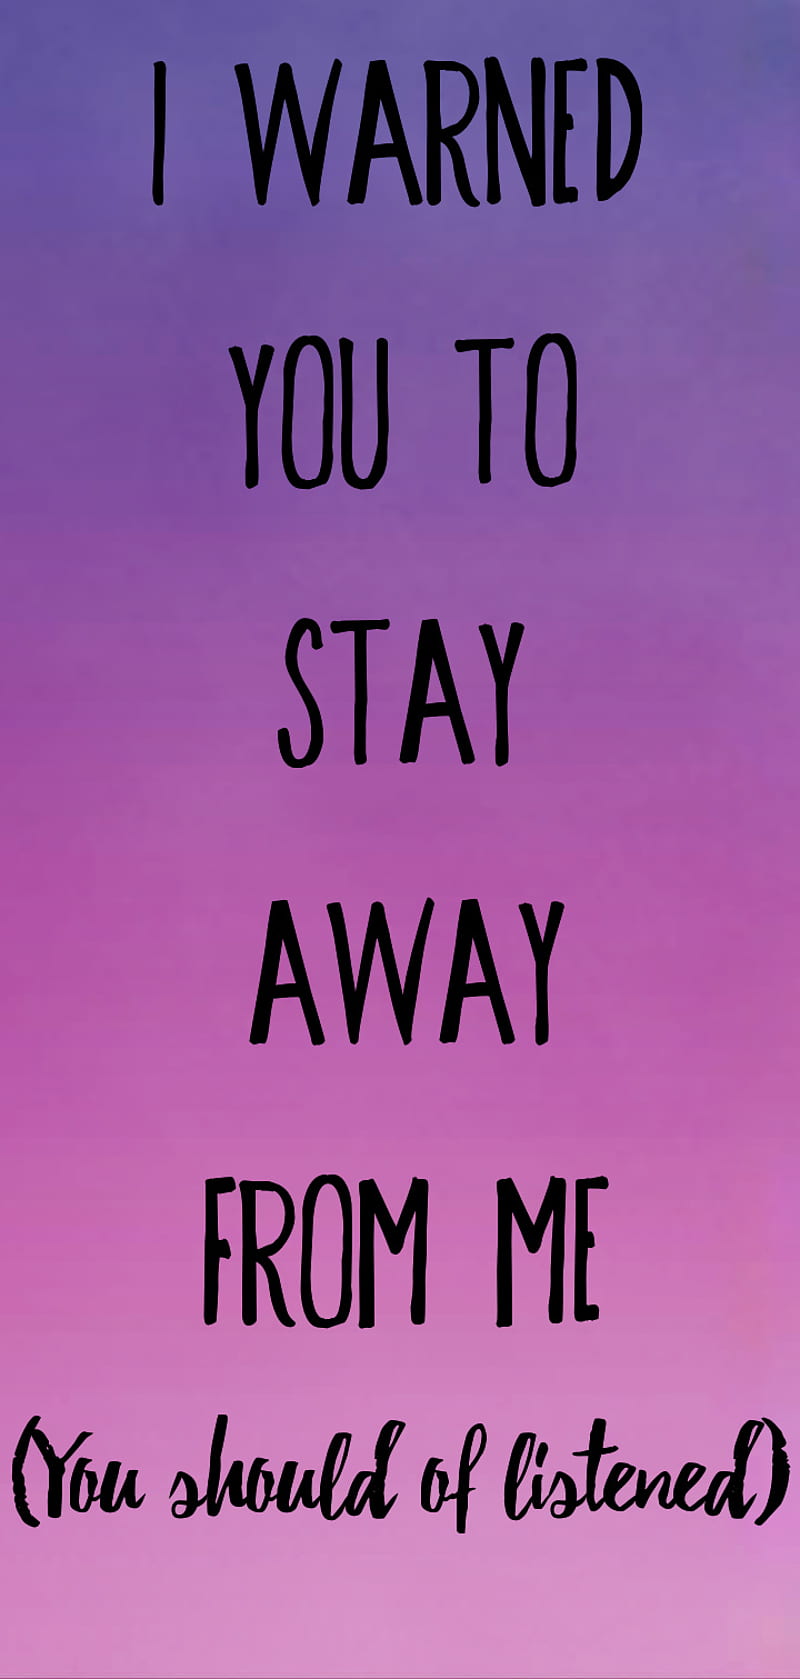 Warned you once, crazy, listened, me, stay away, warned, HD phone wallpaper